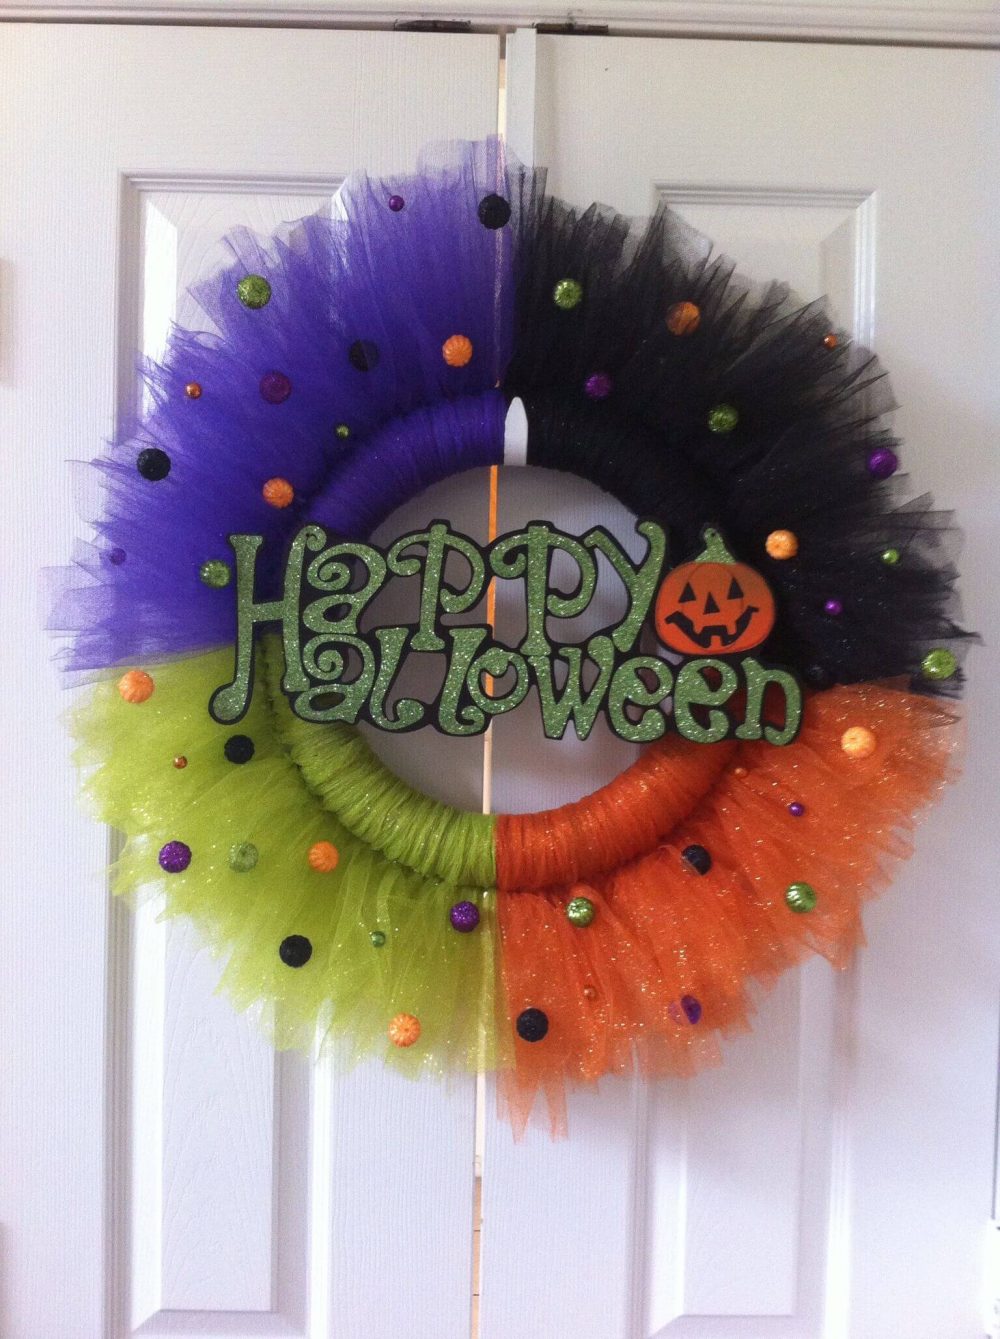 A wreath with a happy halloween sign on it
